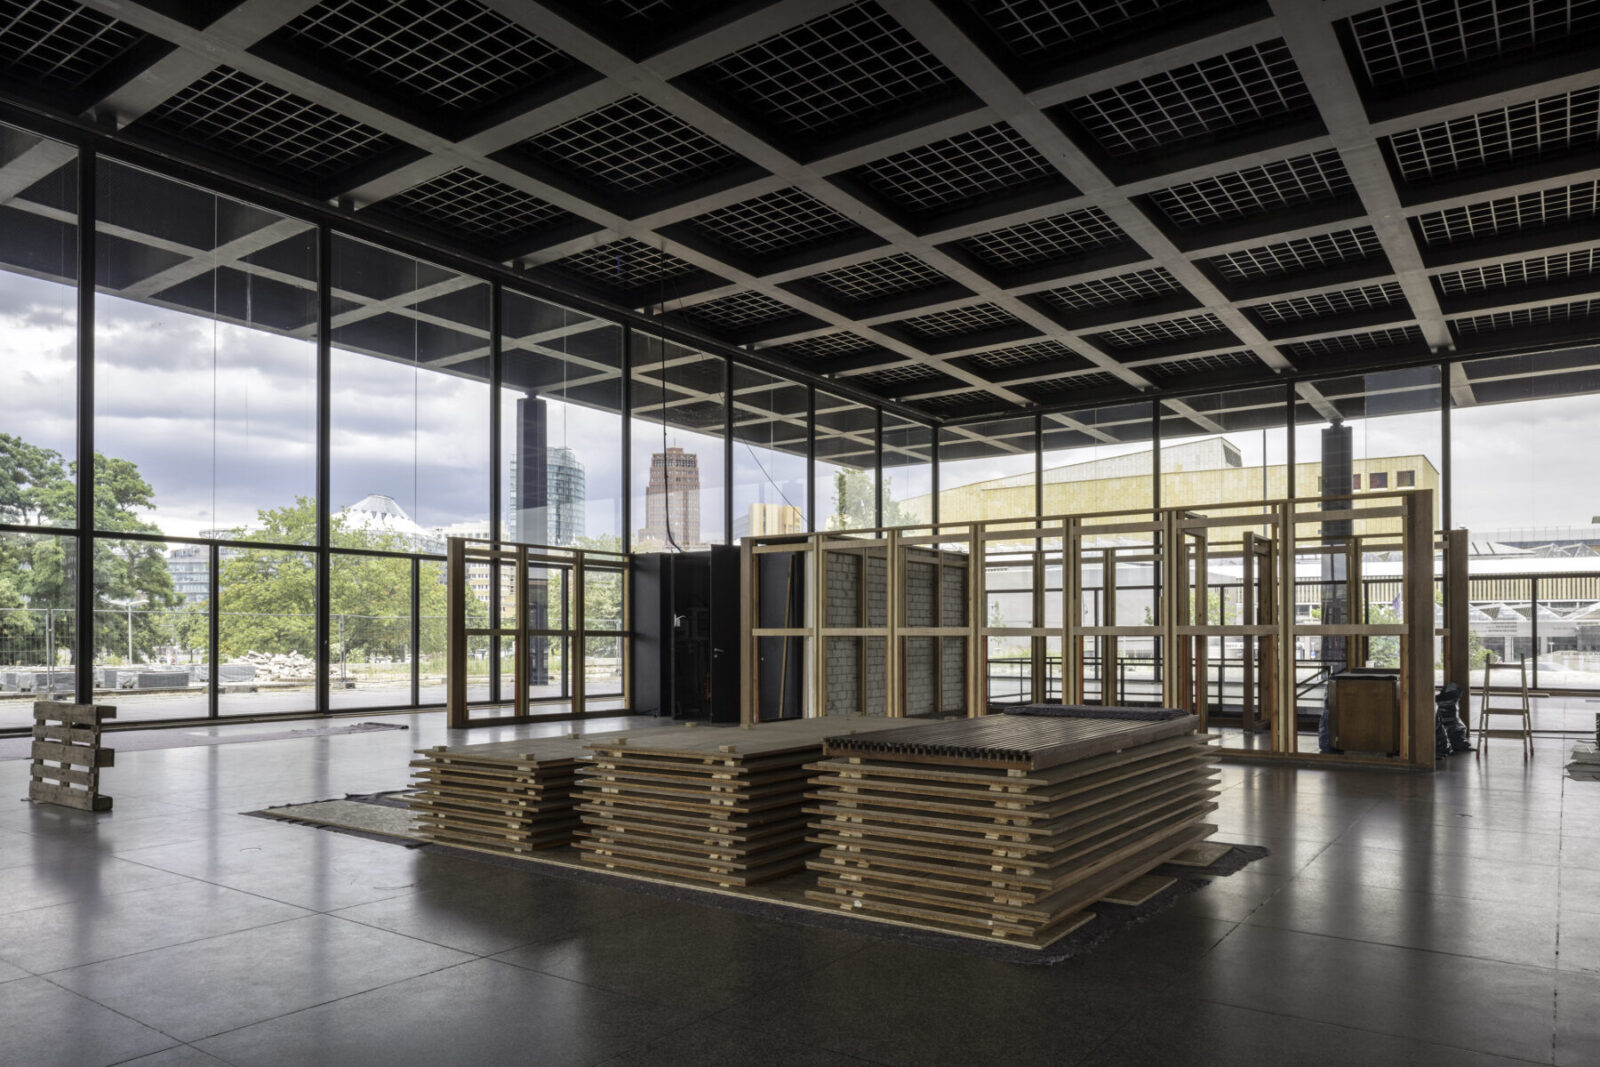 Archisearch David Chipperfield Architects completed the refurbishment of Neue Nationalgalerie in Berlin, Germany | 2012 – 2021